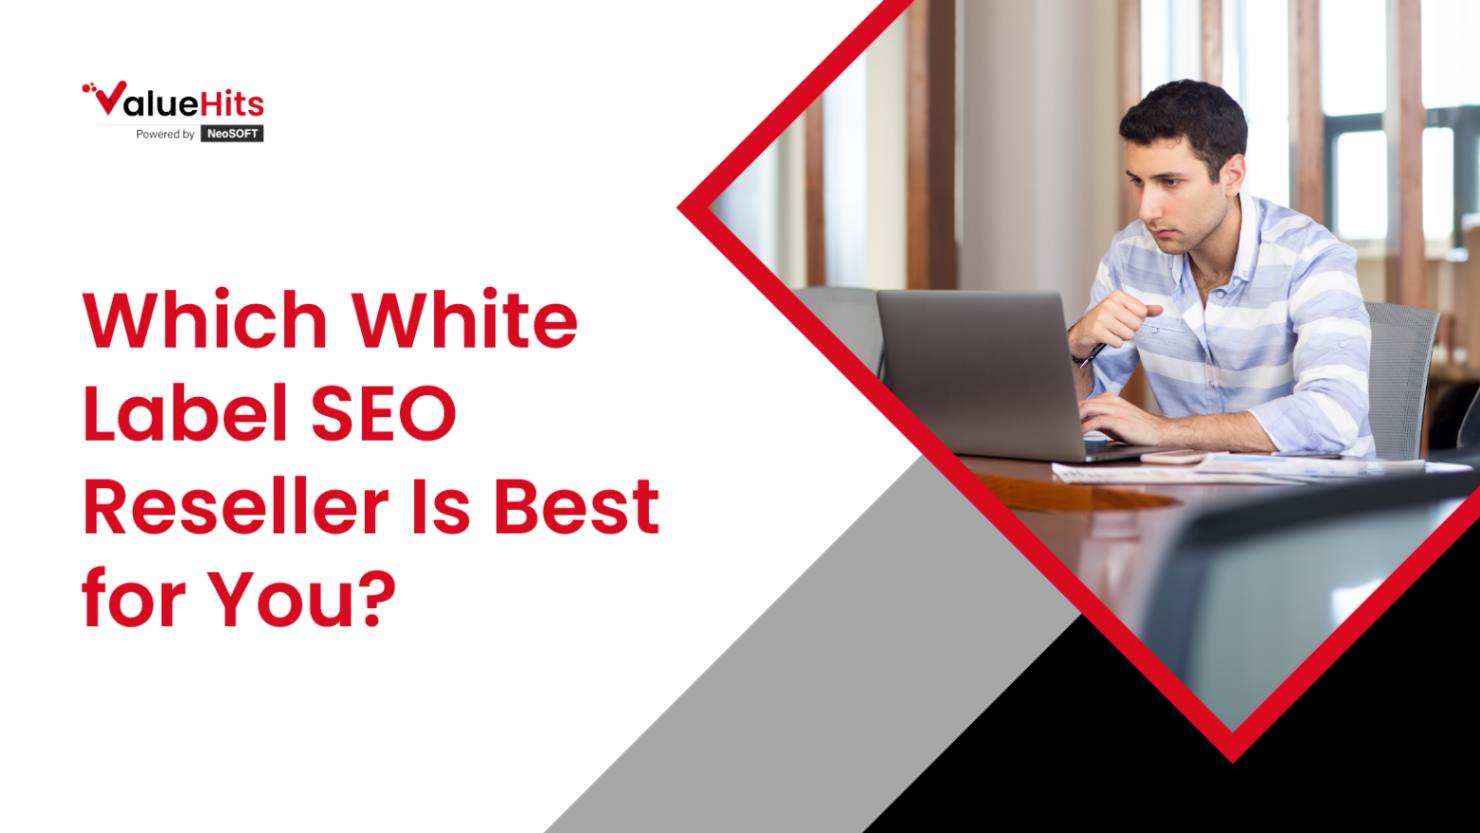 Which White Label SEO Reseller Is Best for You?